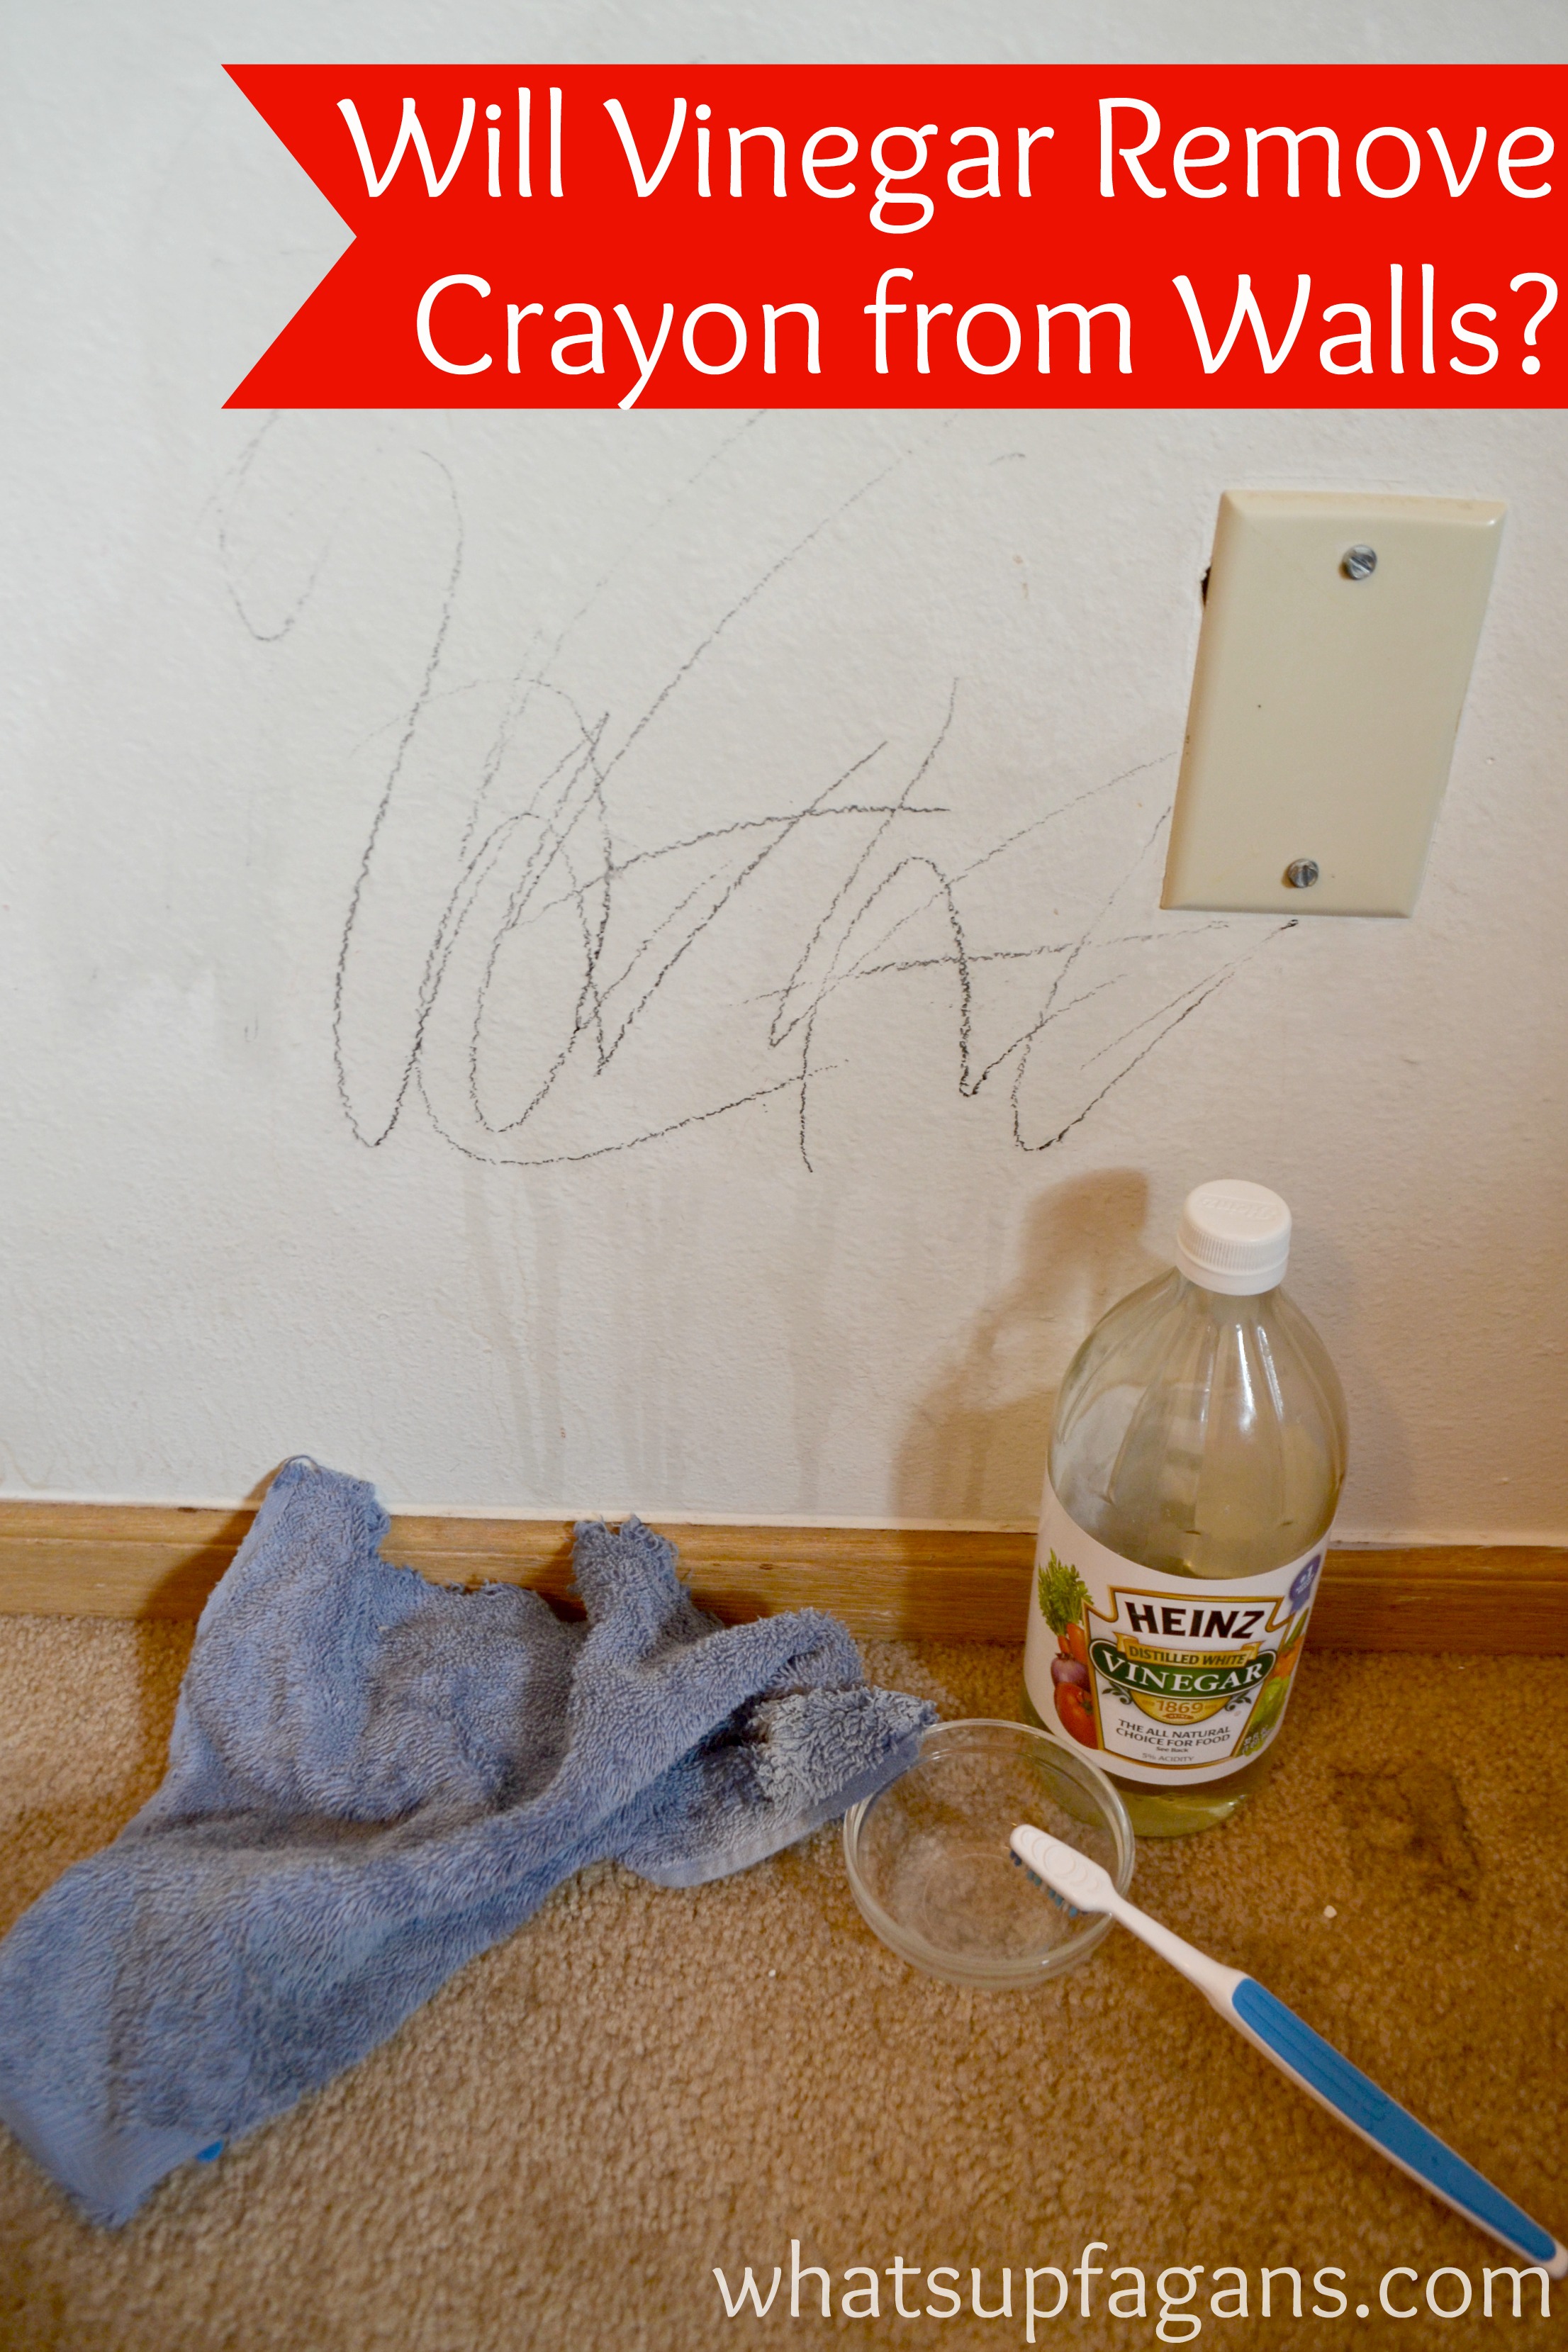 7 Methods that Actually Work to Remove Crayon from Walls